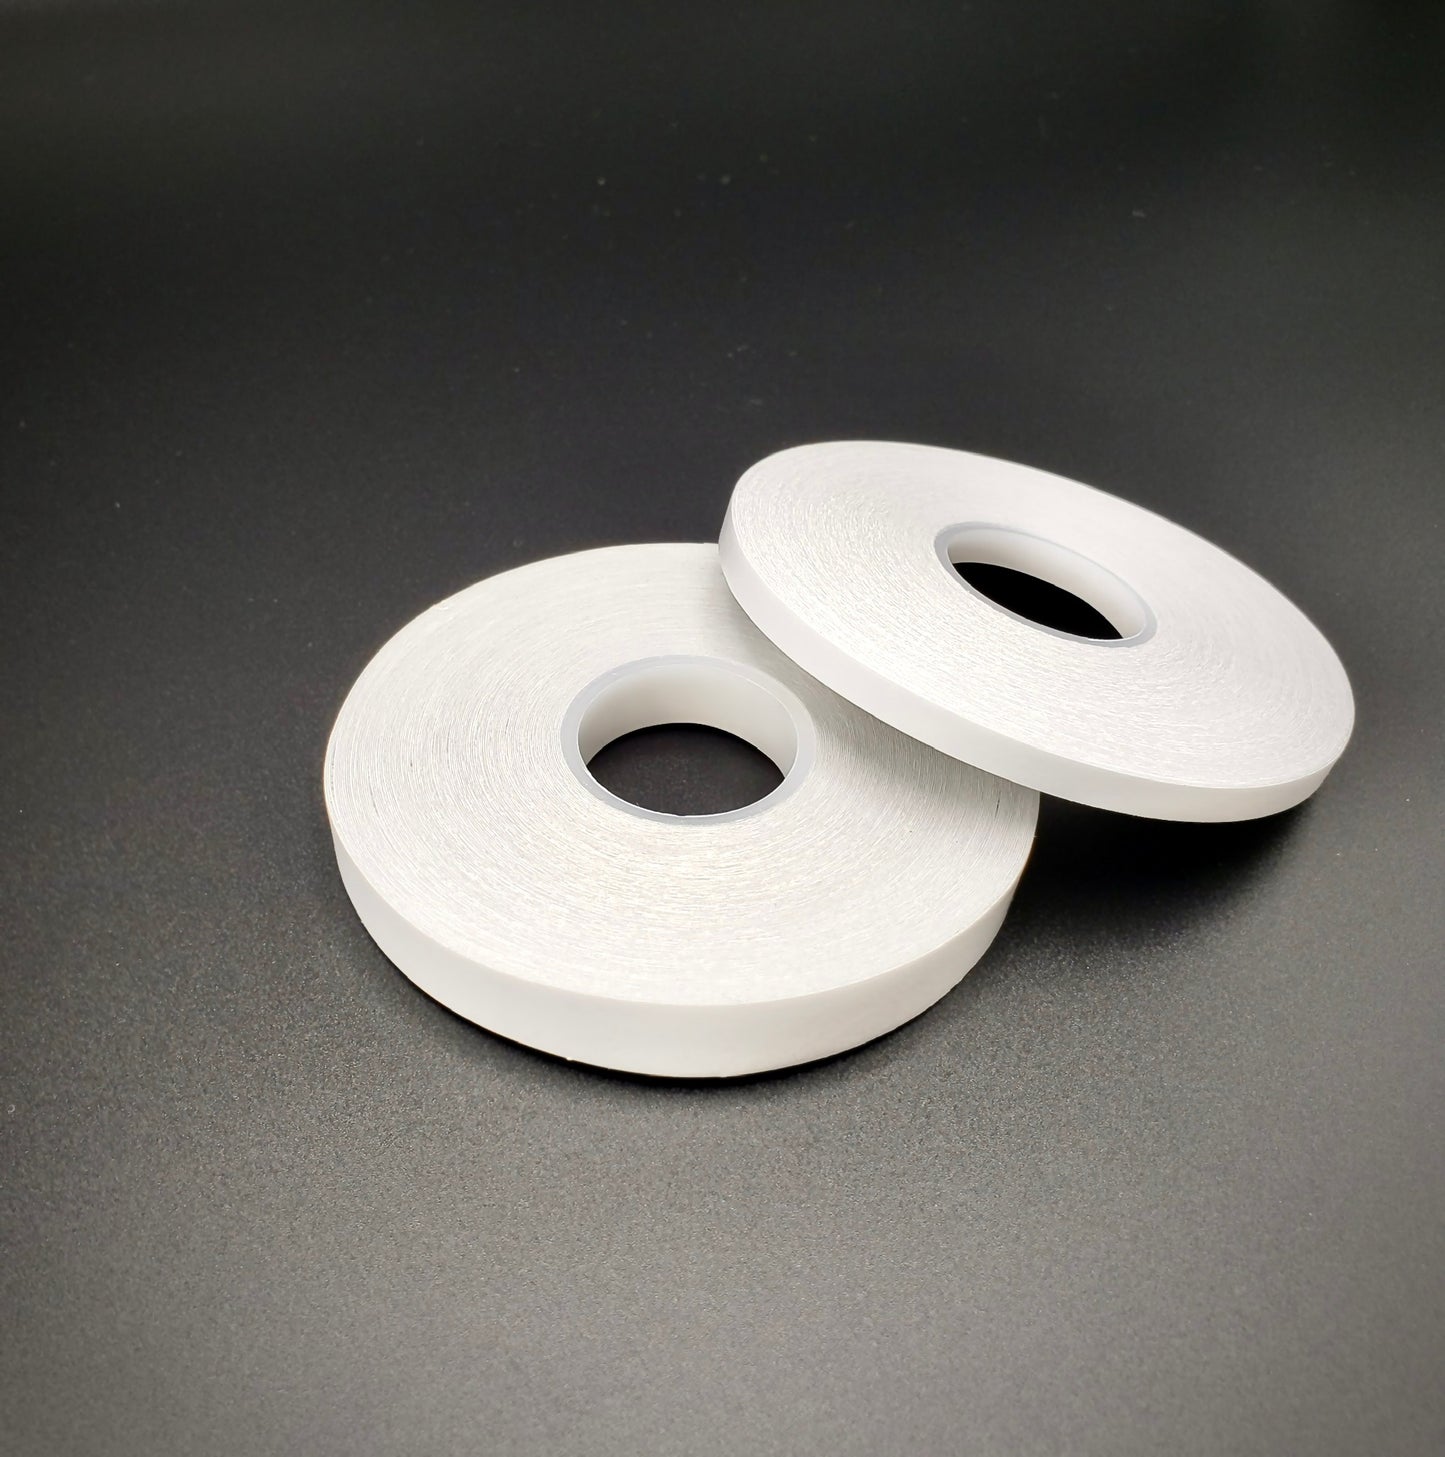 Double-sided leather adhesive tape (both sizes shown)